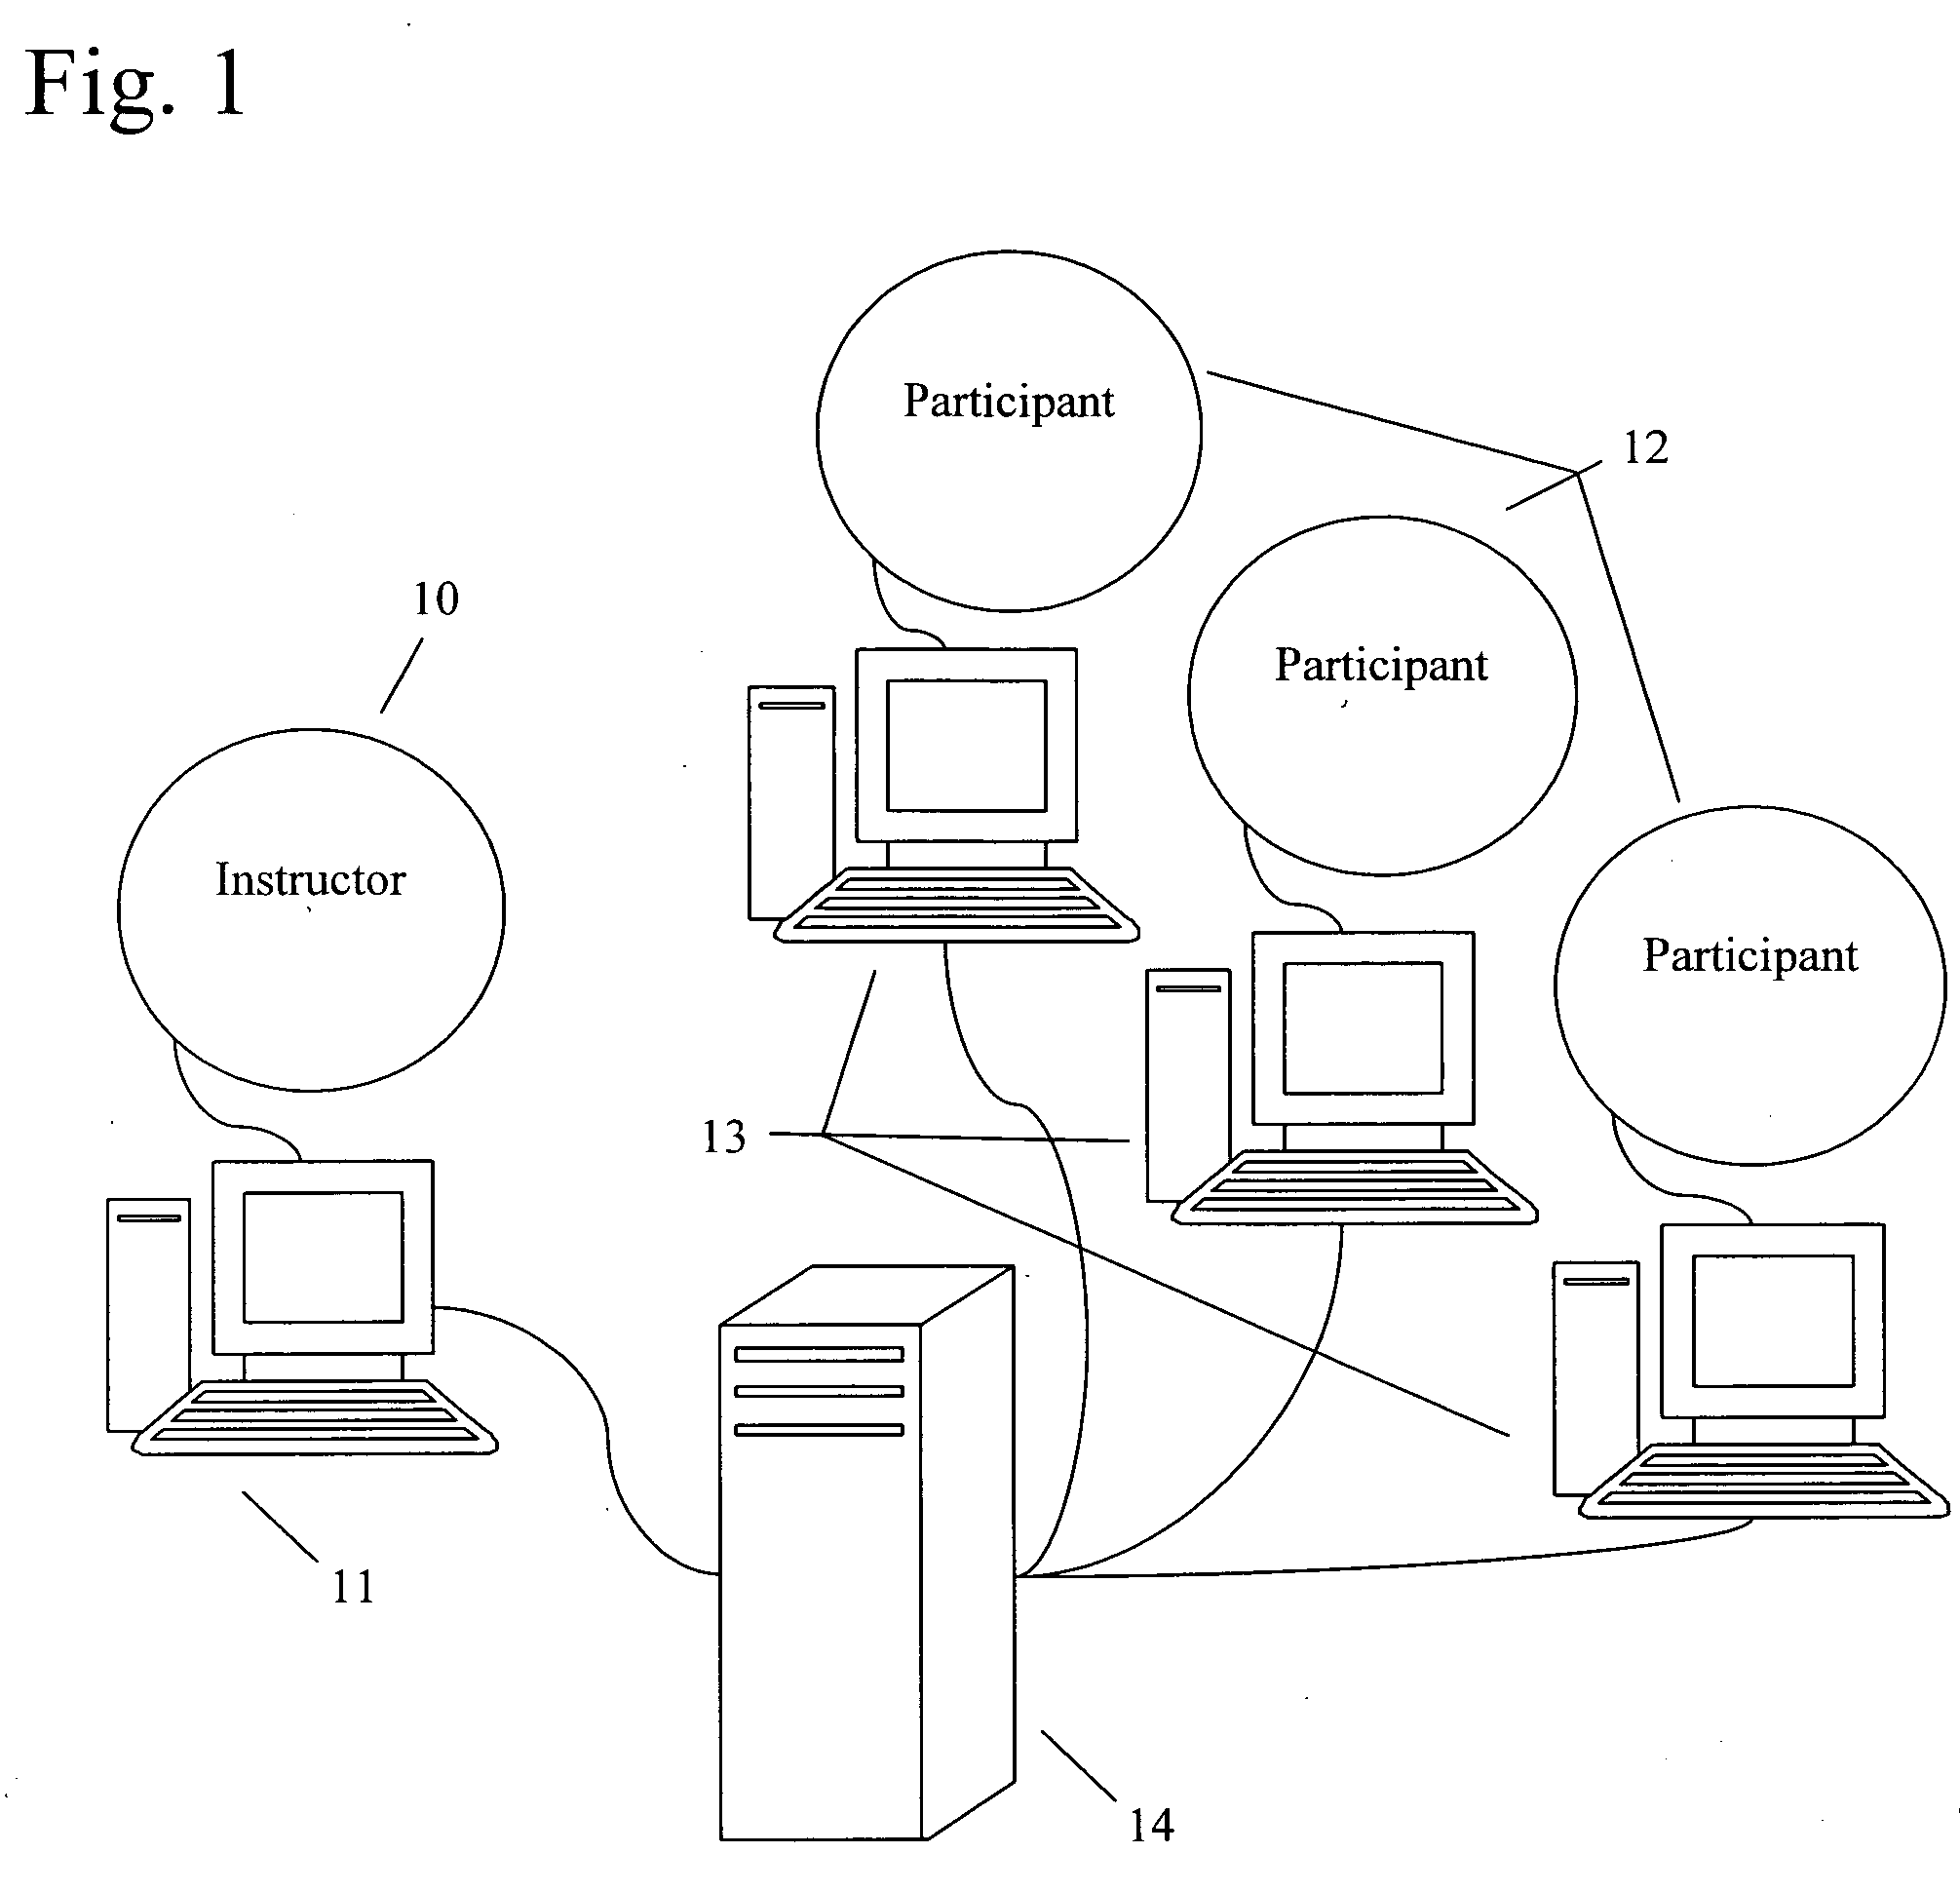 Method and system for computer assisted training and credentialing with follow-up control